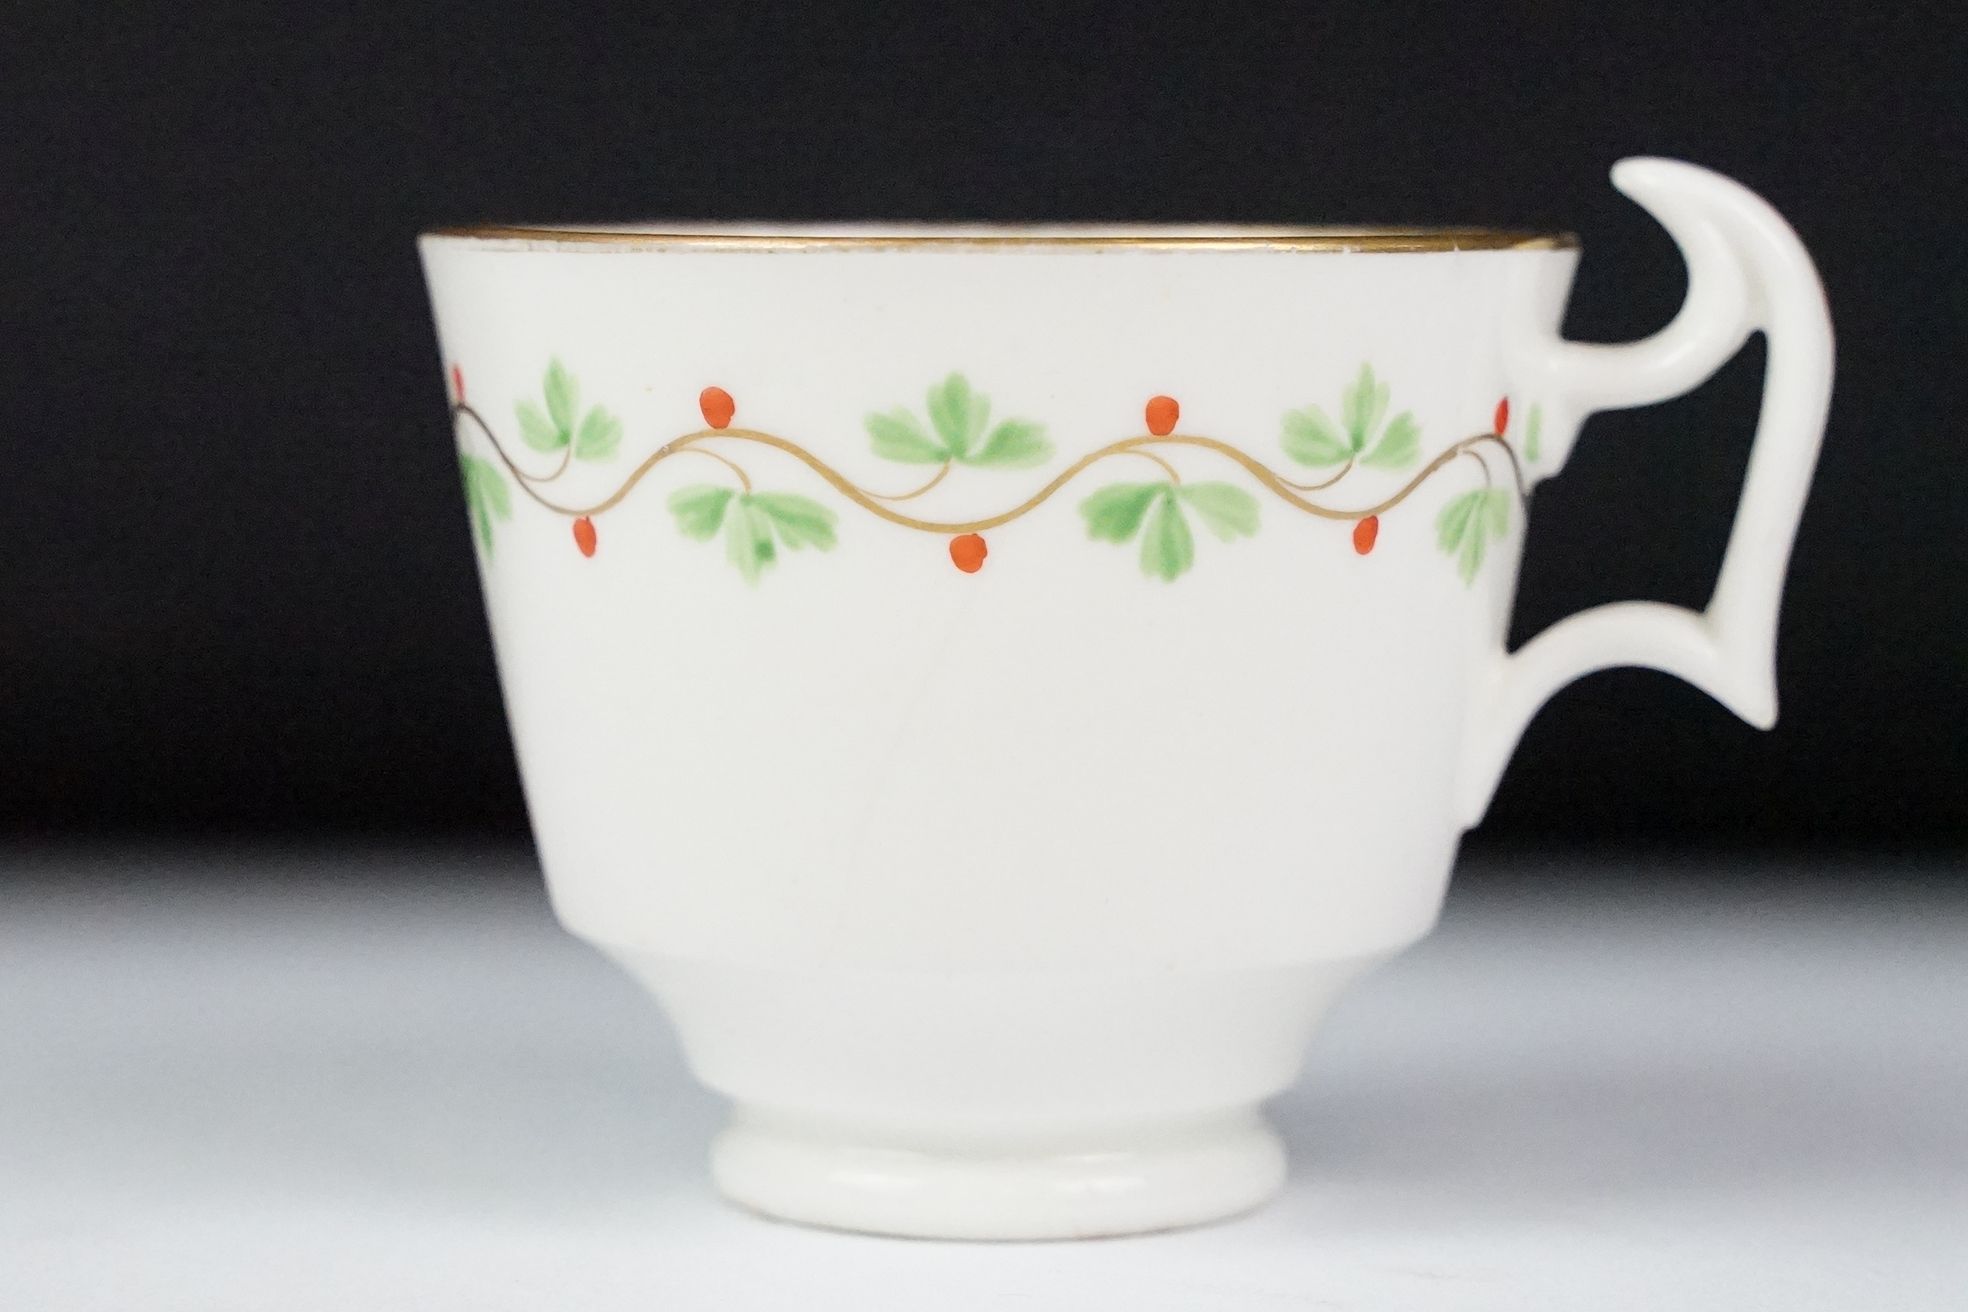 Swansea pottery cup and saucer, hand painted with a floral garland, the saucer, 13.5cm diameter - Image 2 of 7